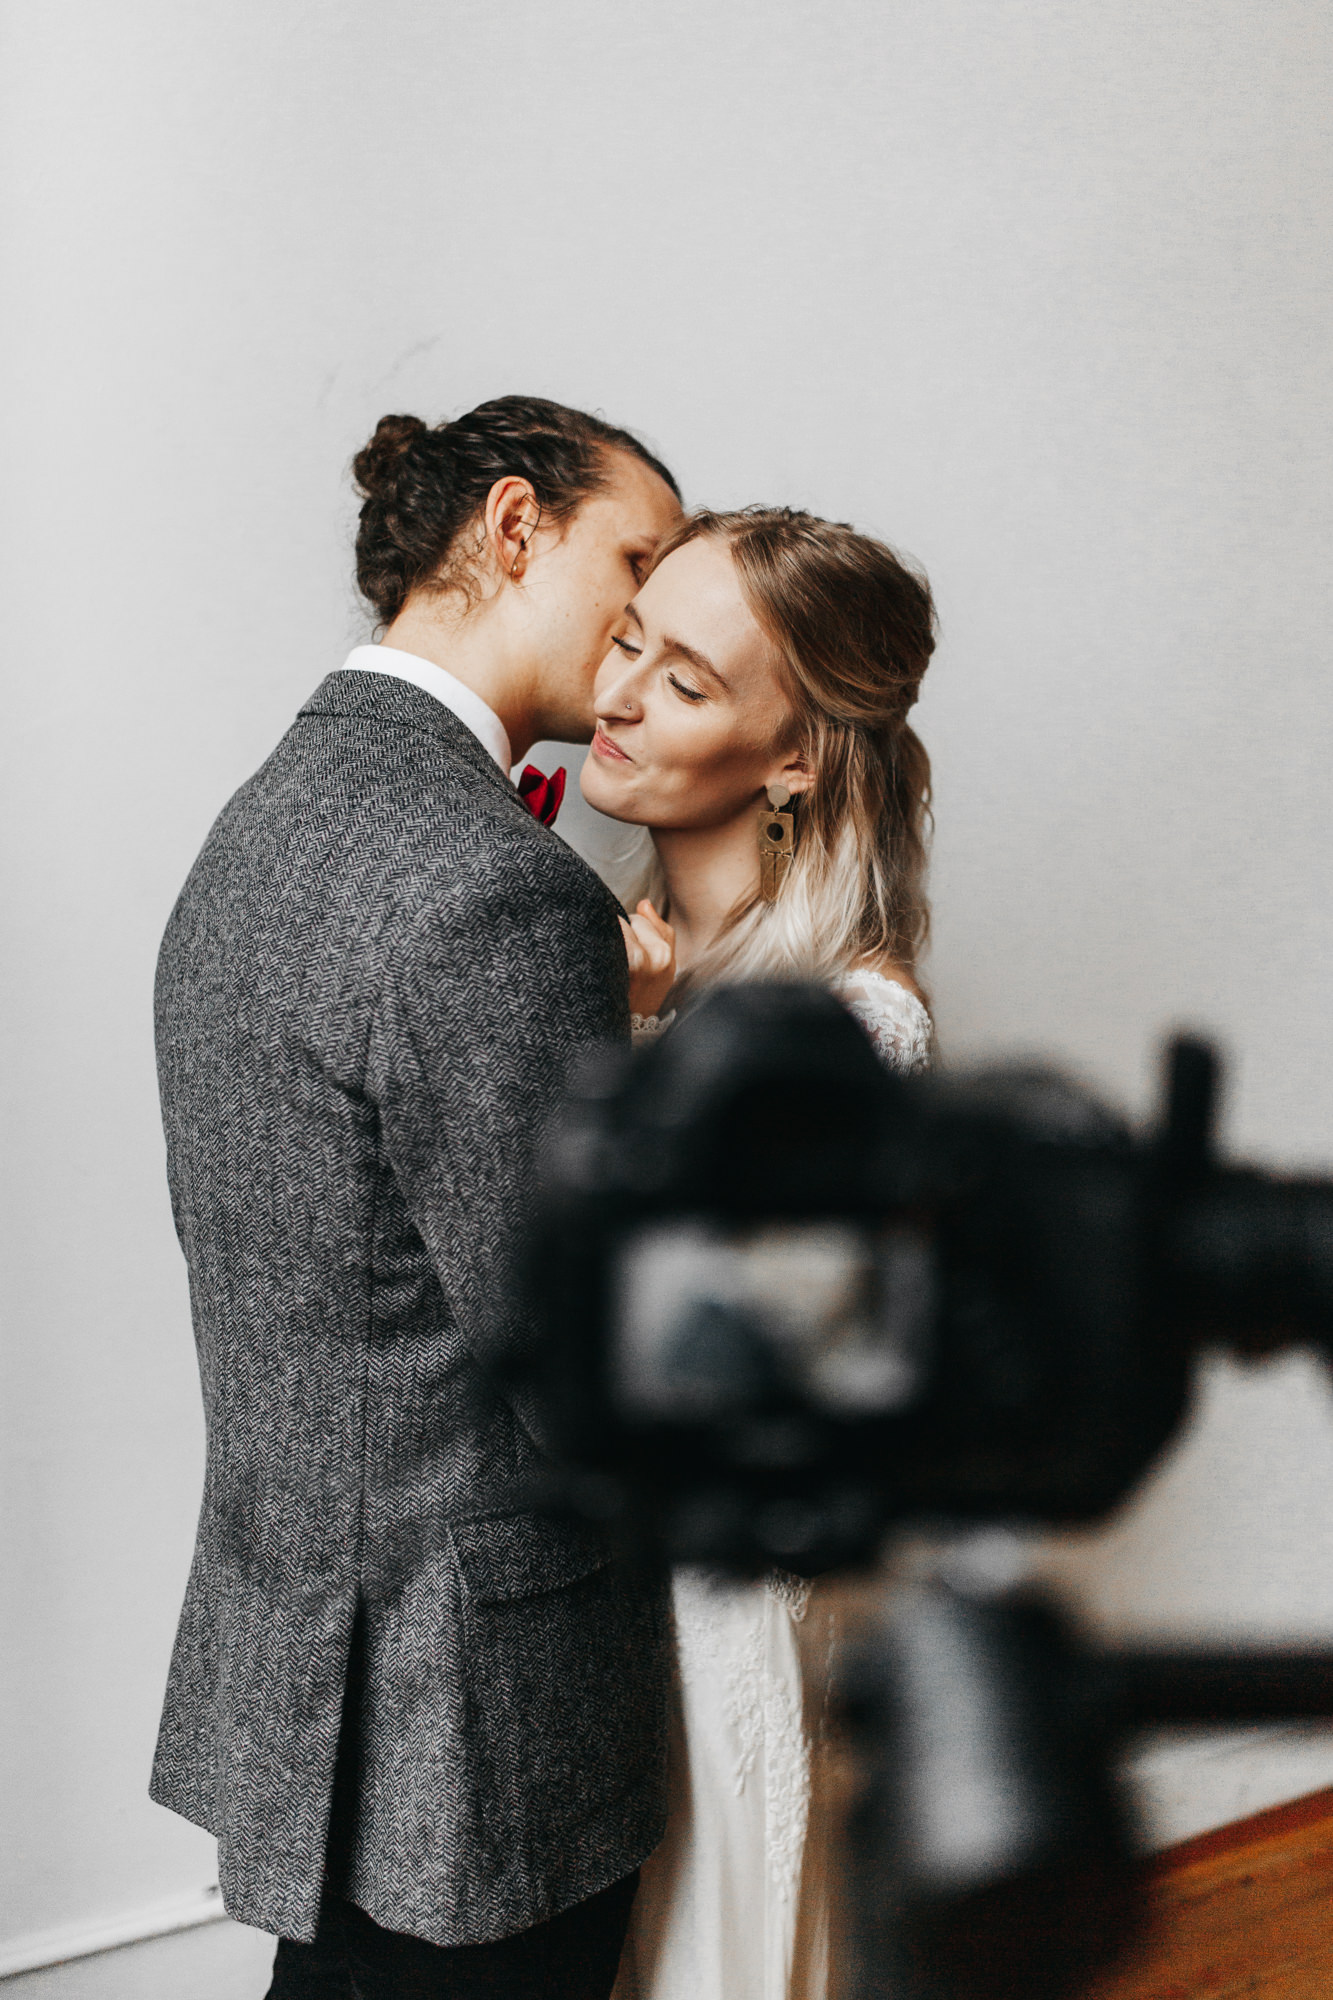 athena-and-camron-embracing-connection-masterclass-posing-couples-wedding-photography-bts-3